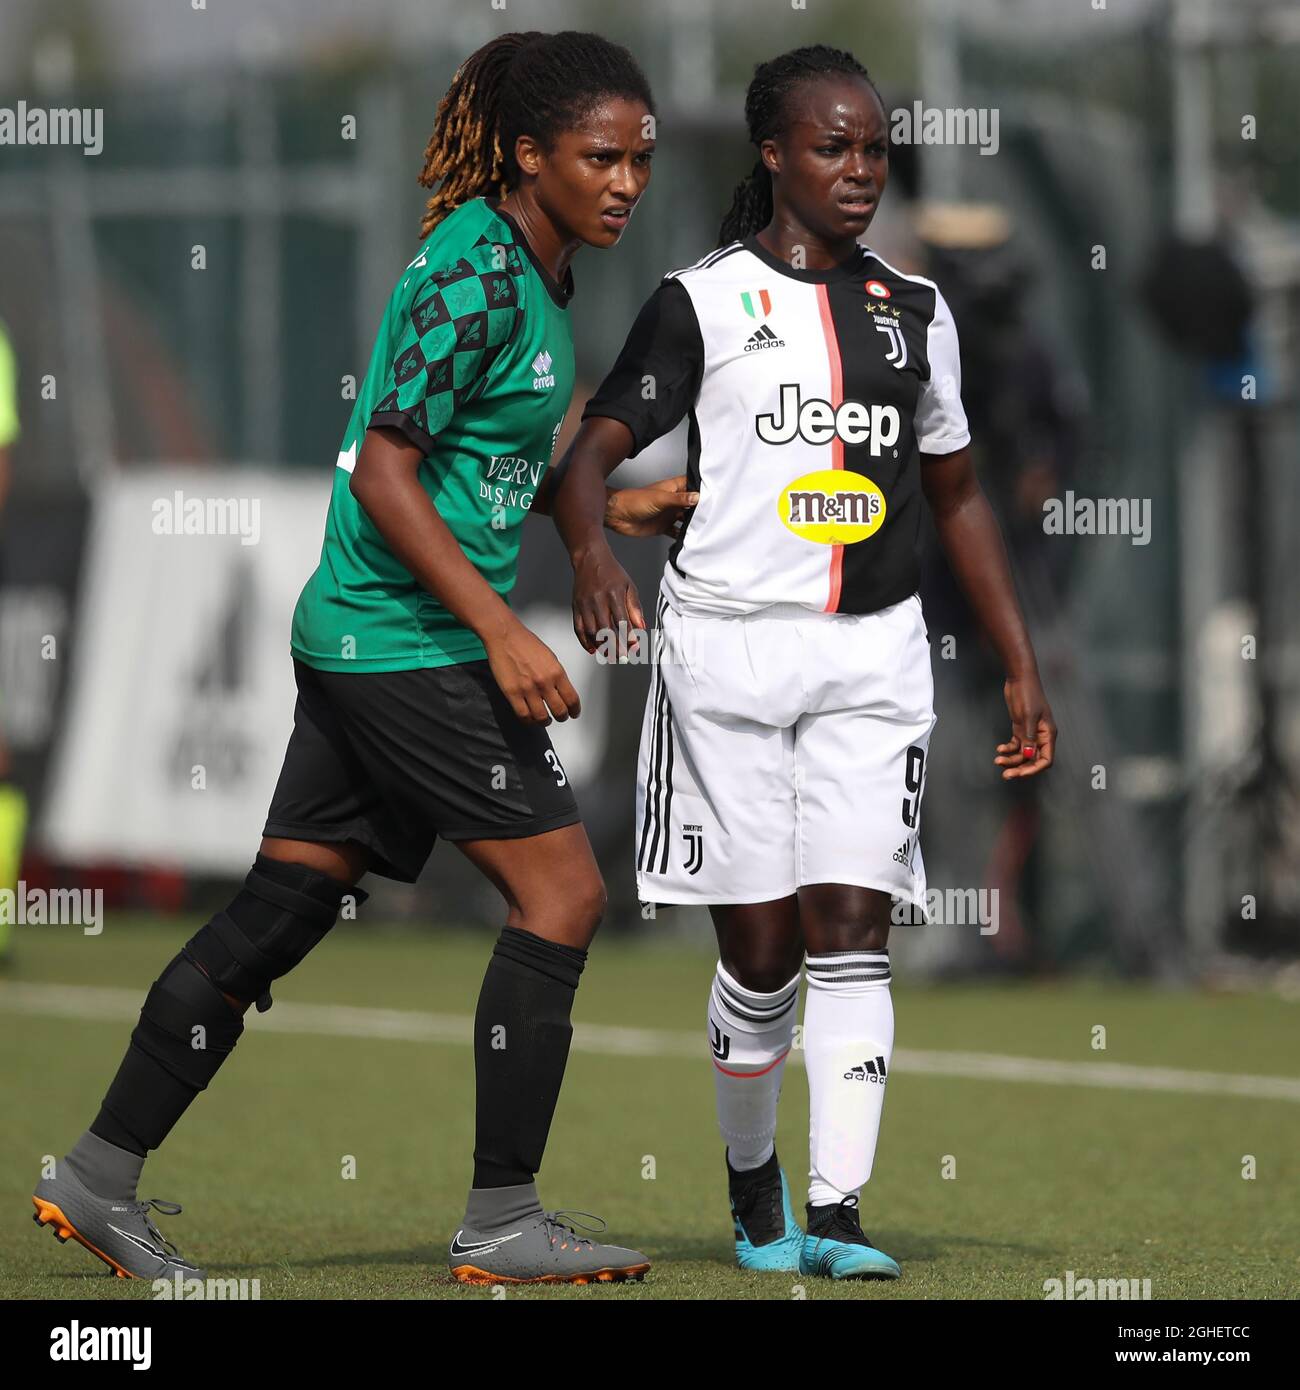 Eva Dupuy of Florentia and Eniola Aluko of Juventus during the Serie A  Femminile match at the Juventus Center, Vinovo. Picture date: 13th October  2019. Picture credit should read: Jonathan Moscrop/Sportimage via